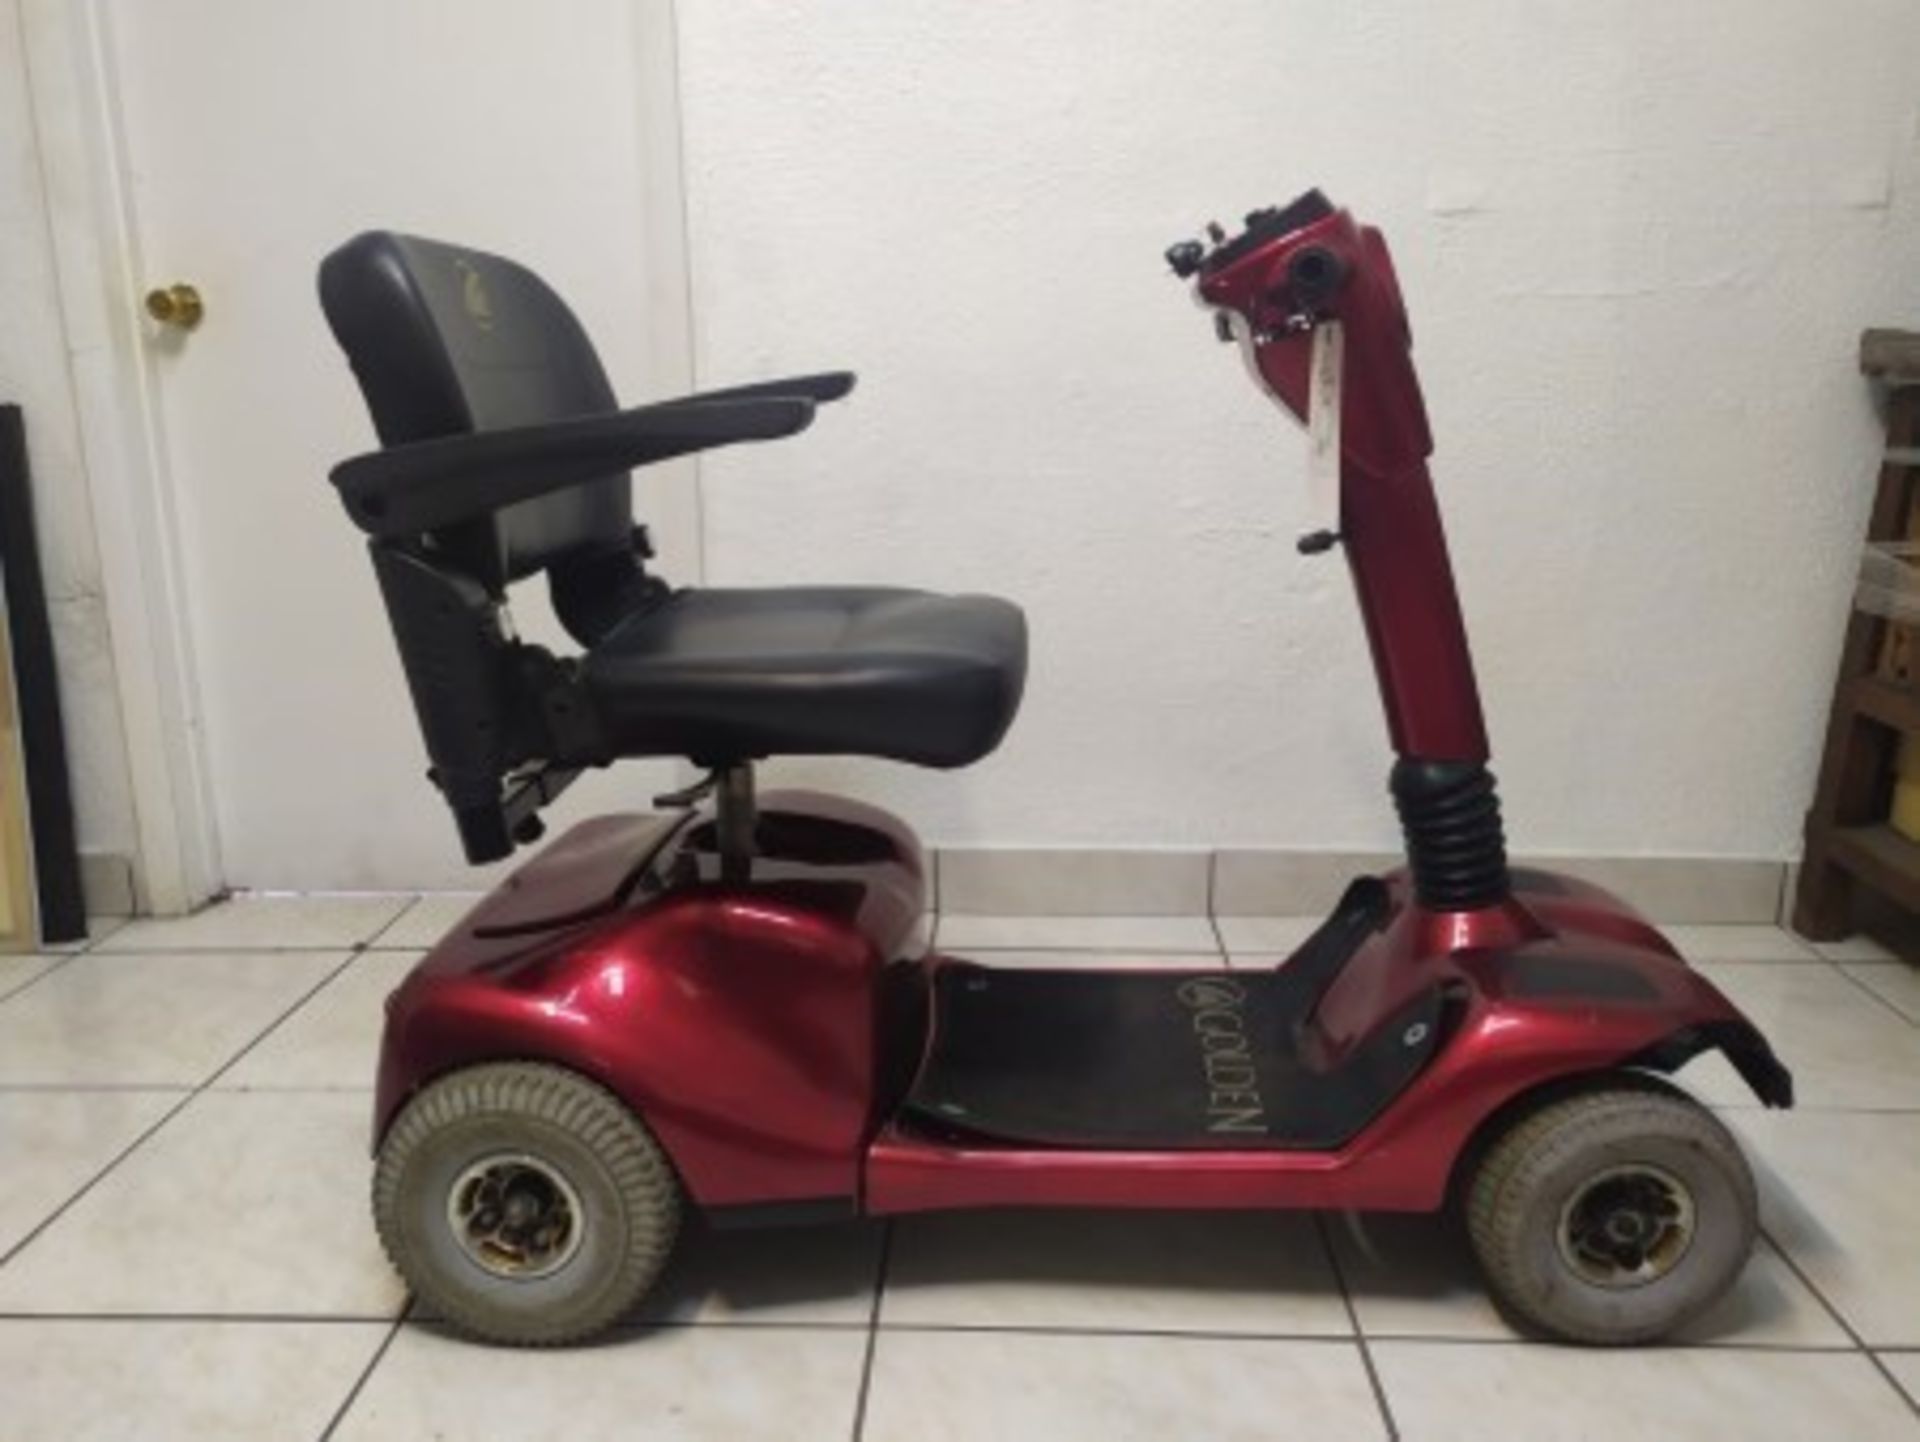 2005 GOLDEN COMPANION GC421 4-WHEEL SCOOTER WITH BUILT-IN CHARGER & BATTERY - RED - 400LB CAPACITY - - Image 4 of 5